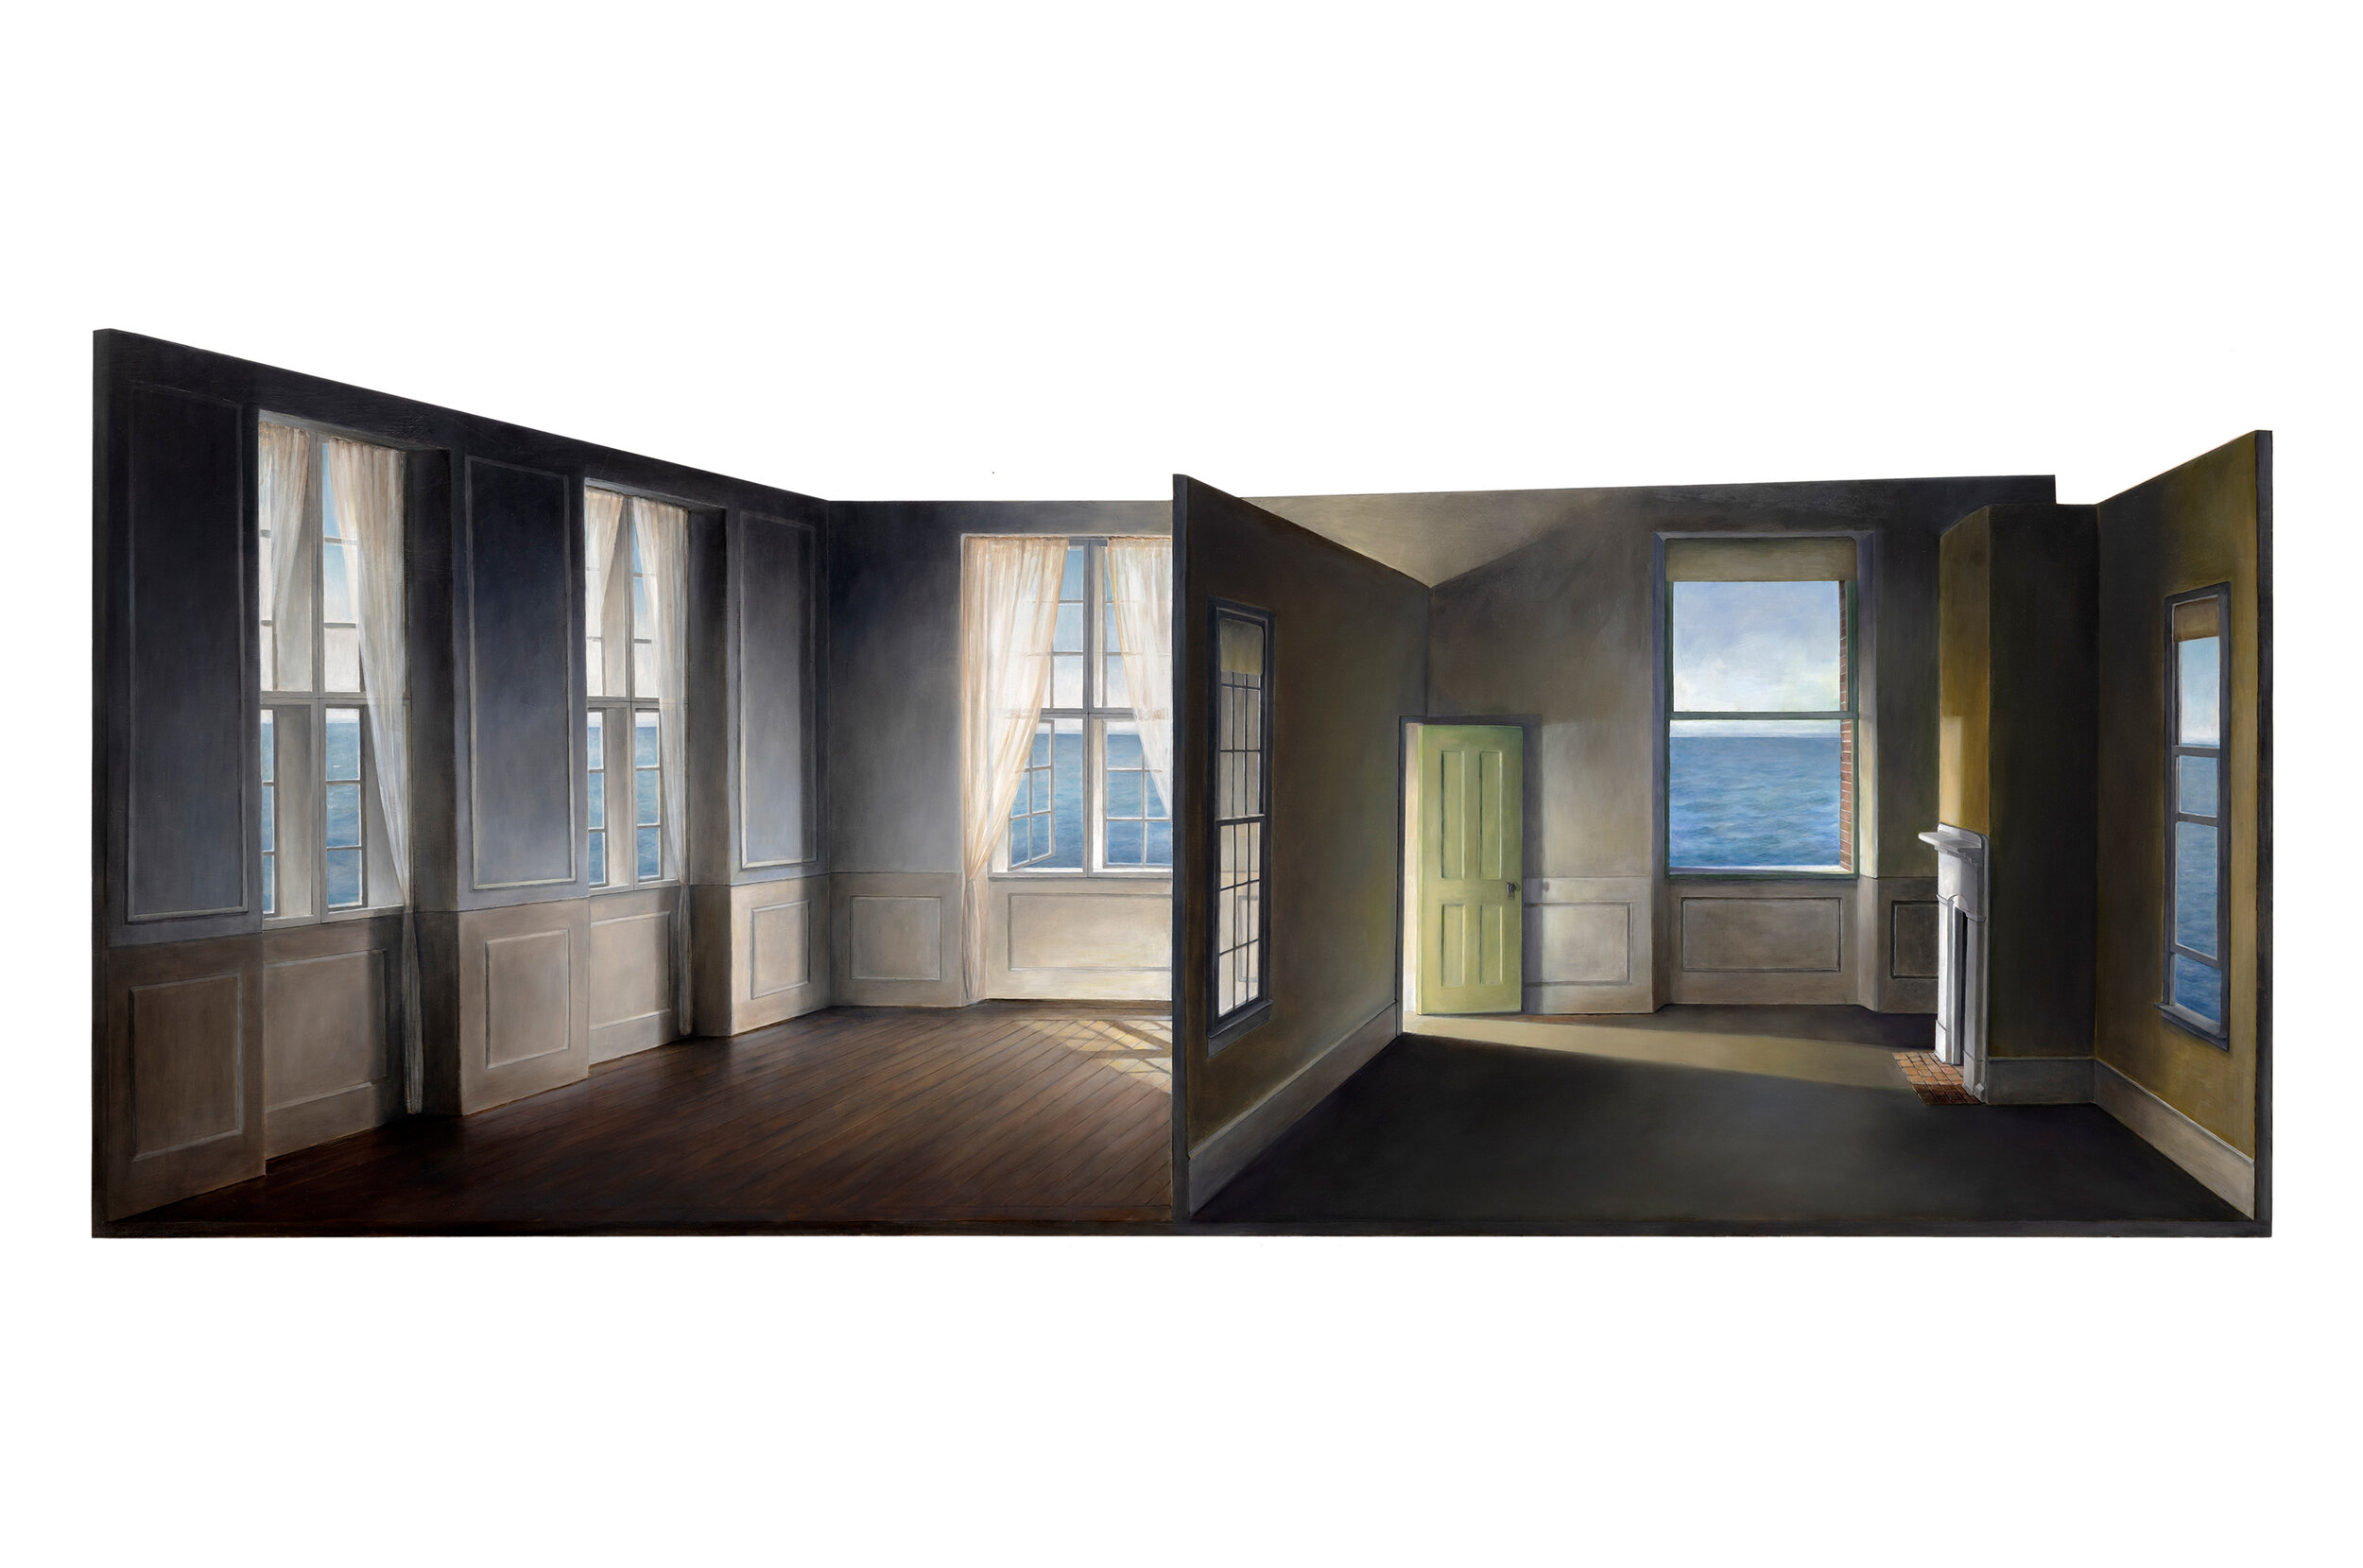   Rooms by the Sea (for Hopper and Hammershøi)   2019  Oil on shaped panel  34.5 x 82 inches 